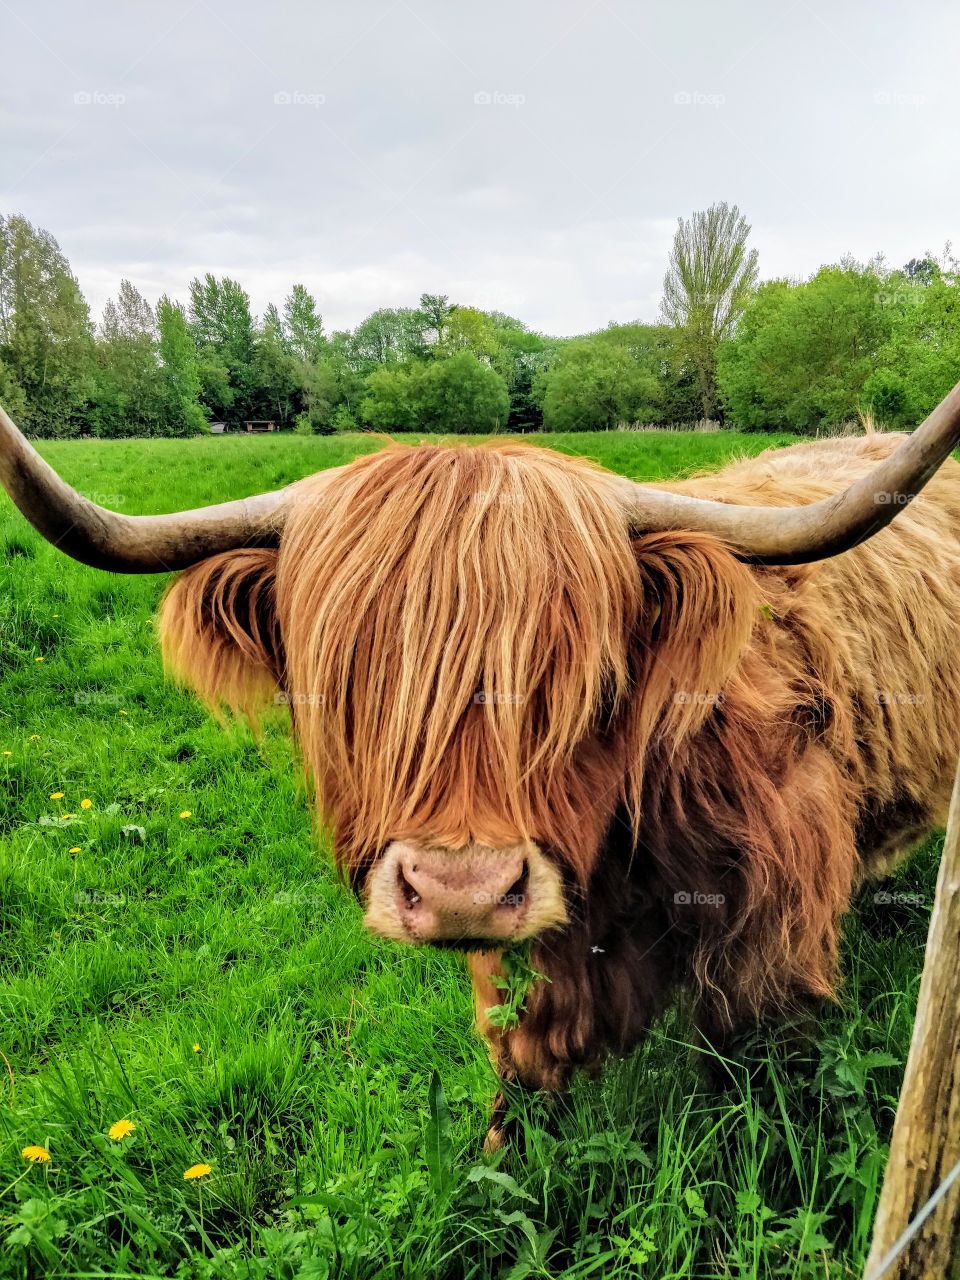 A cow with a fabulous haircut we met on our sunday bikeride out in the Danish countryside